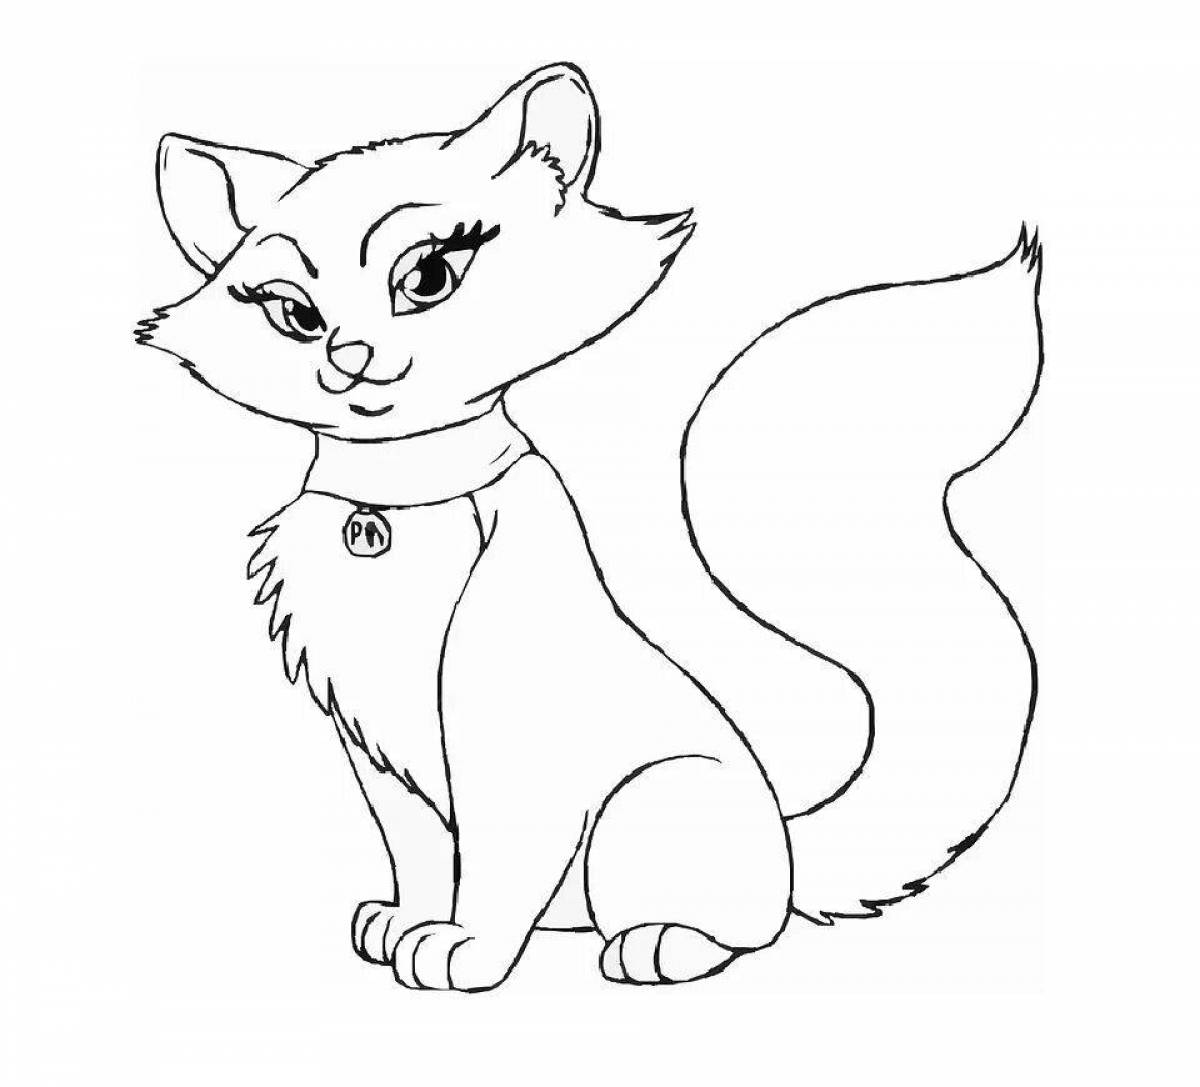 Coloring page intrigued sitting cat